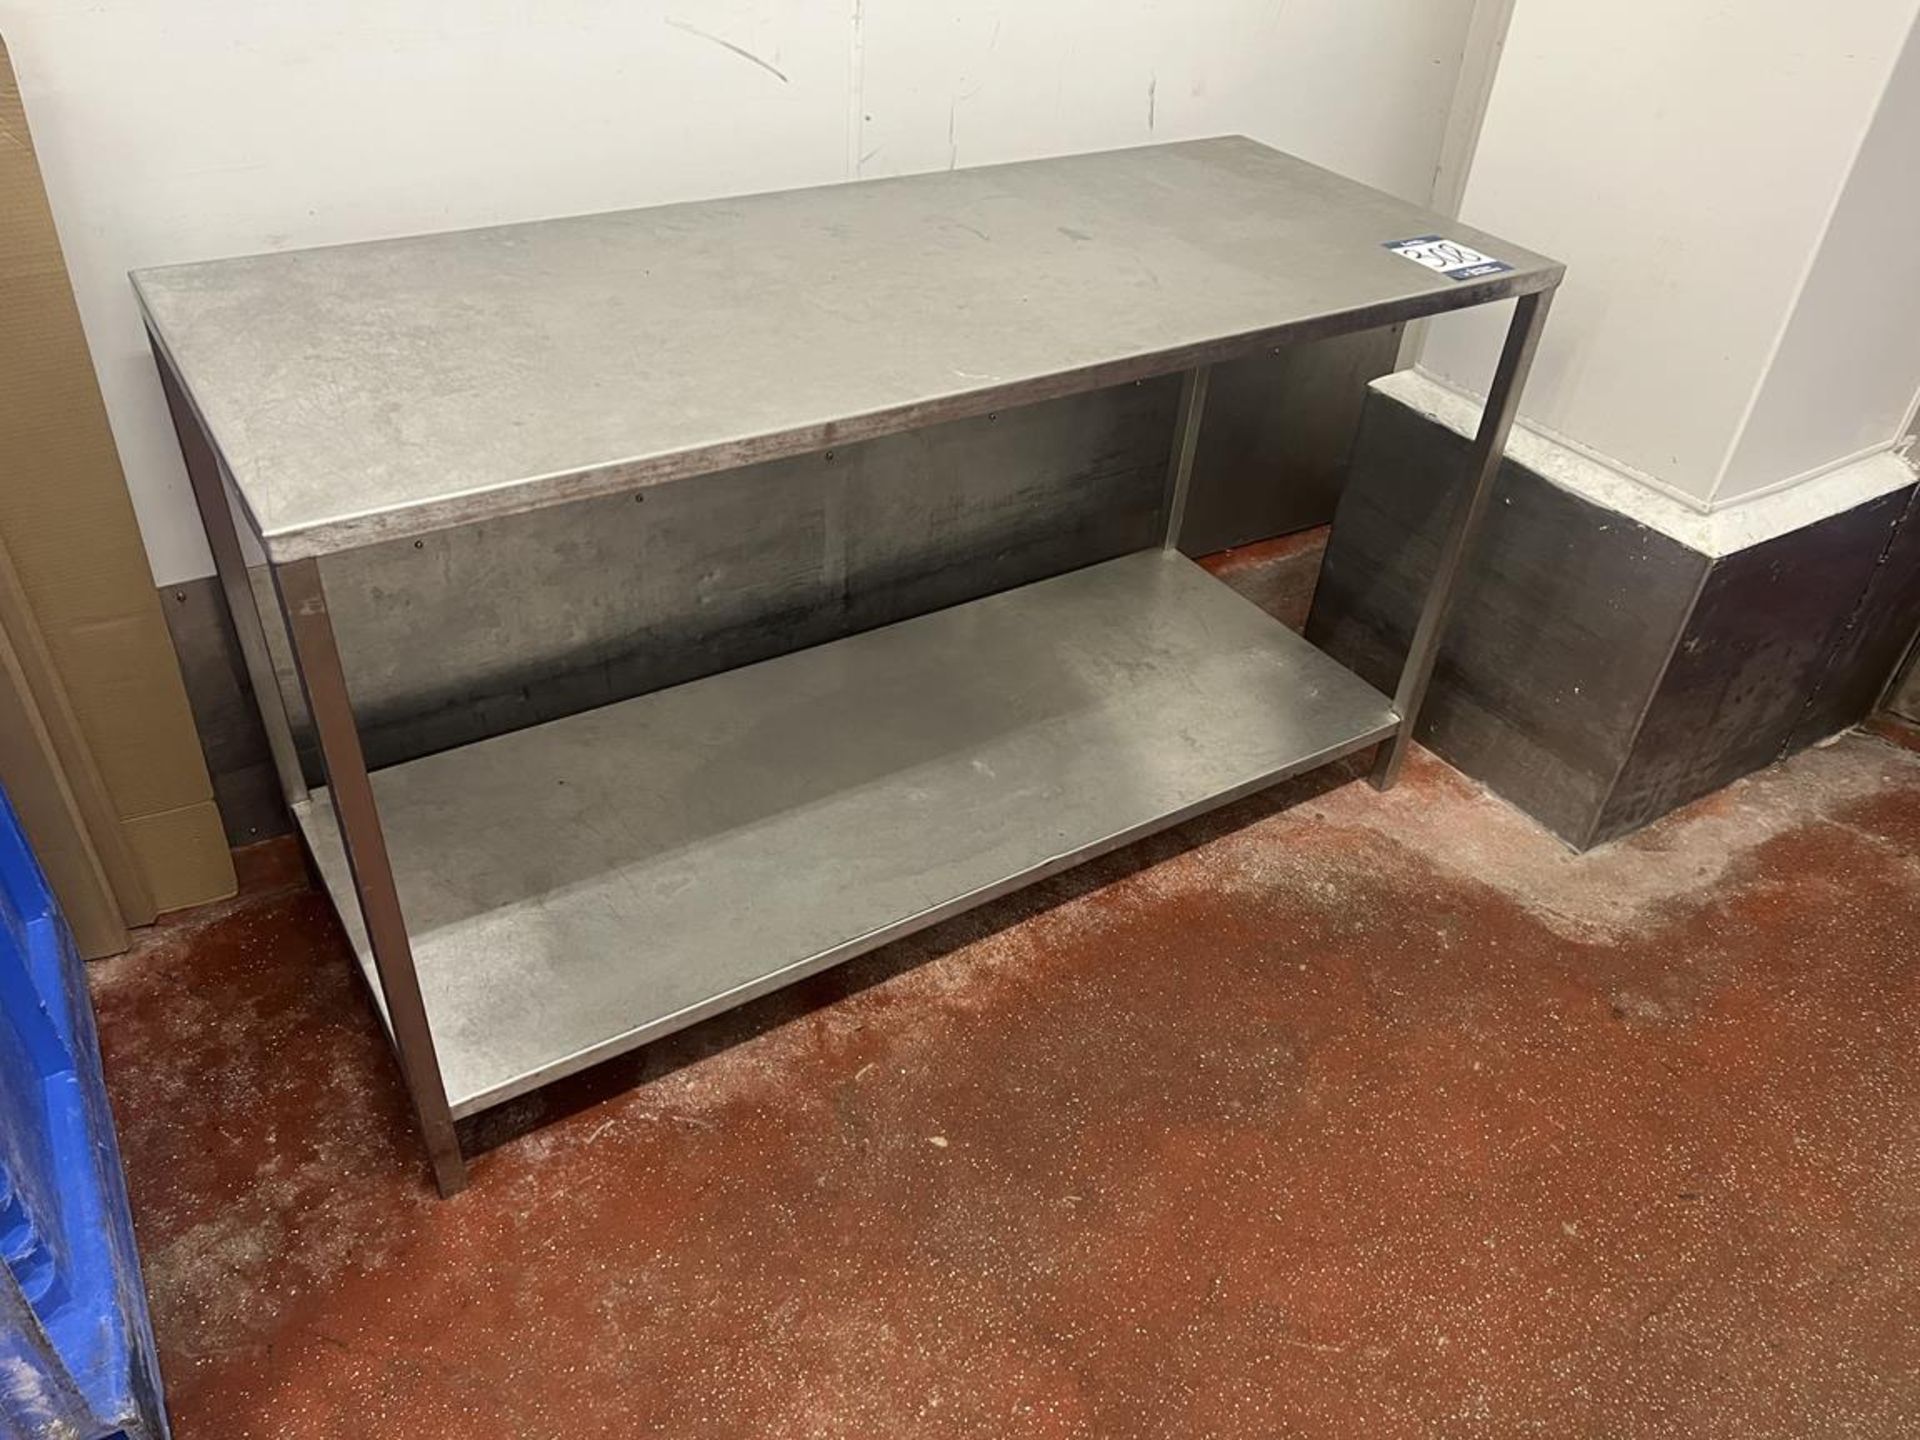 Stainless steel preparation table, approx. 1500x600x840mm